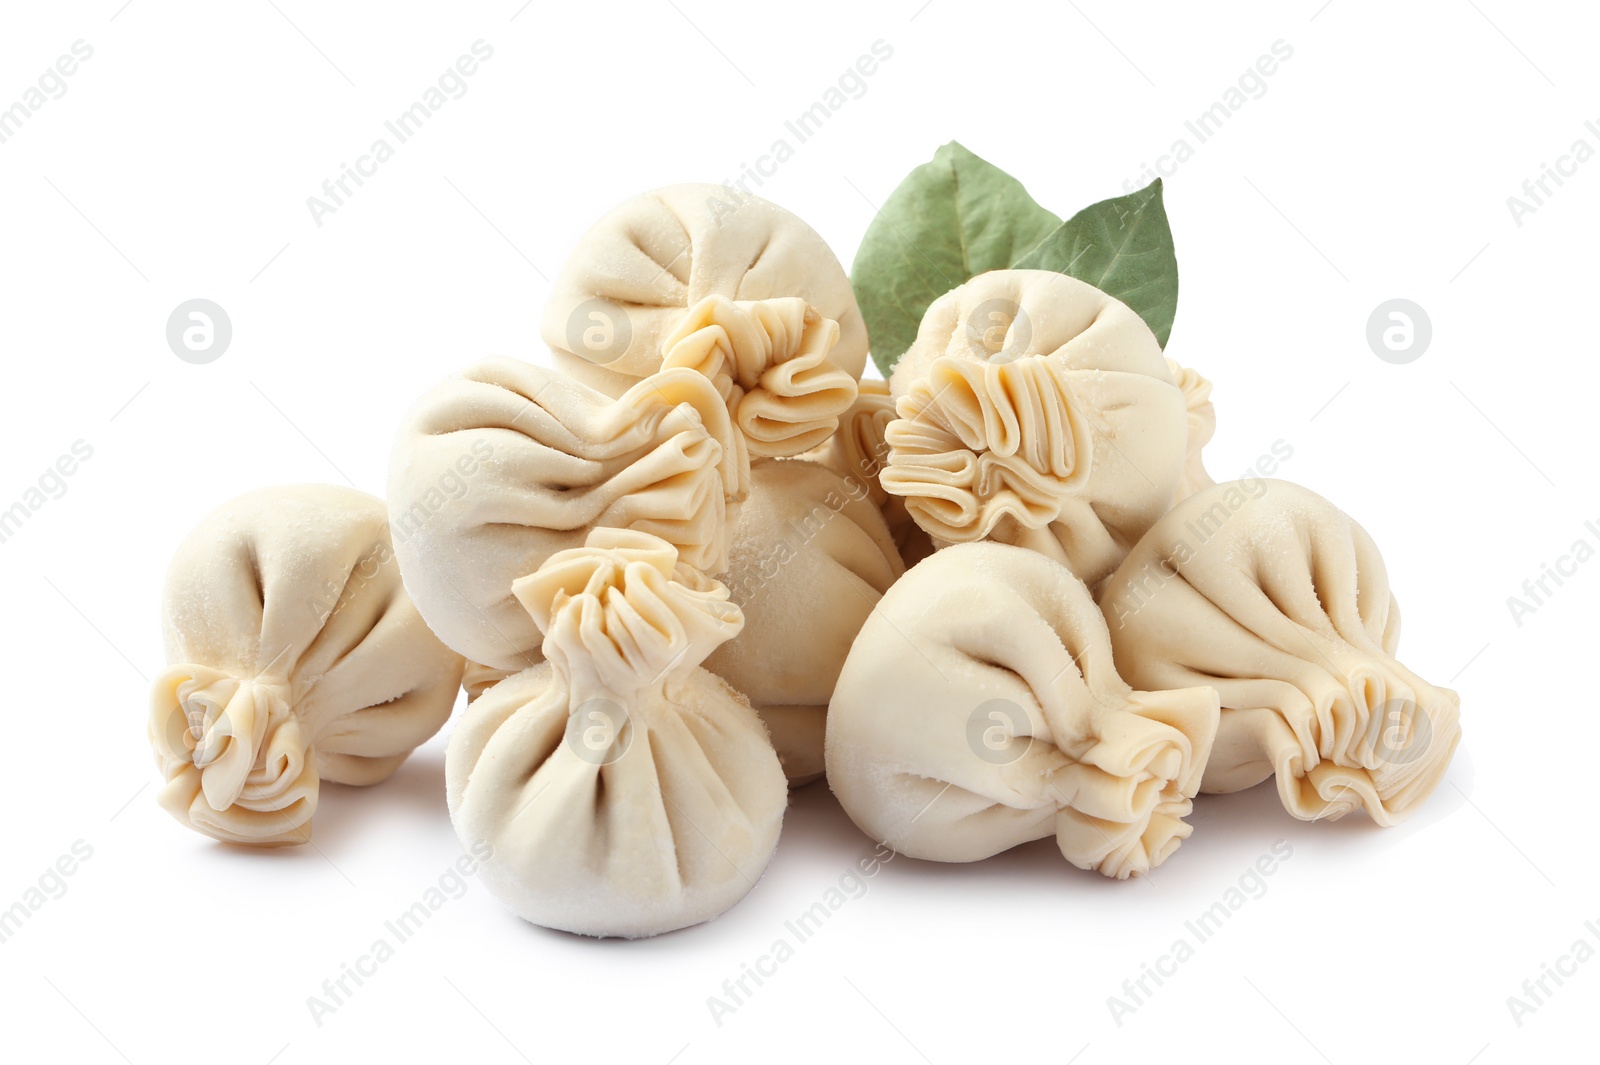 Photo of Pile of raw dumplings with bay leaves on white background